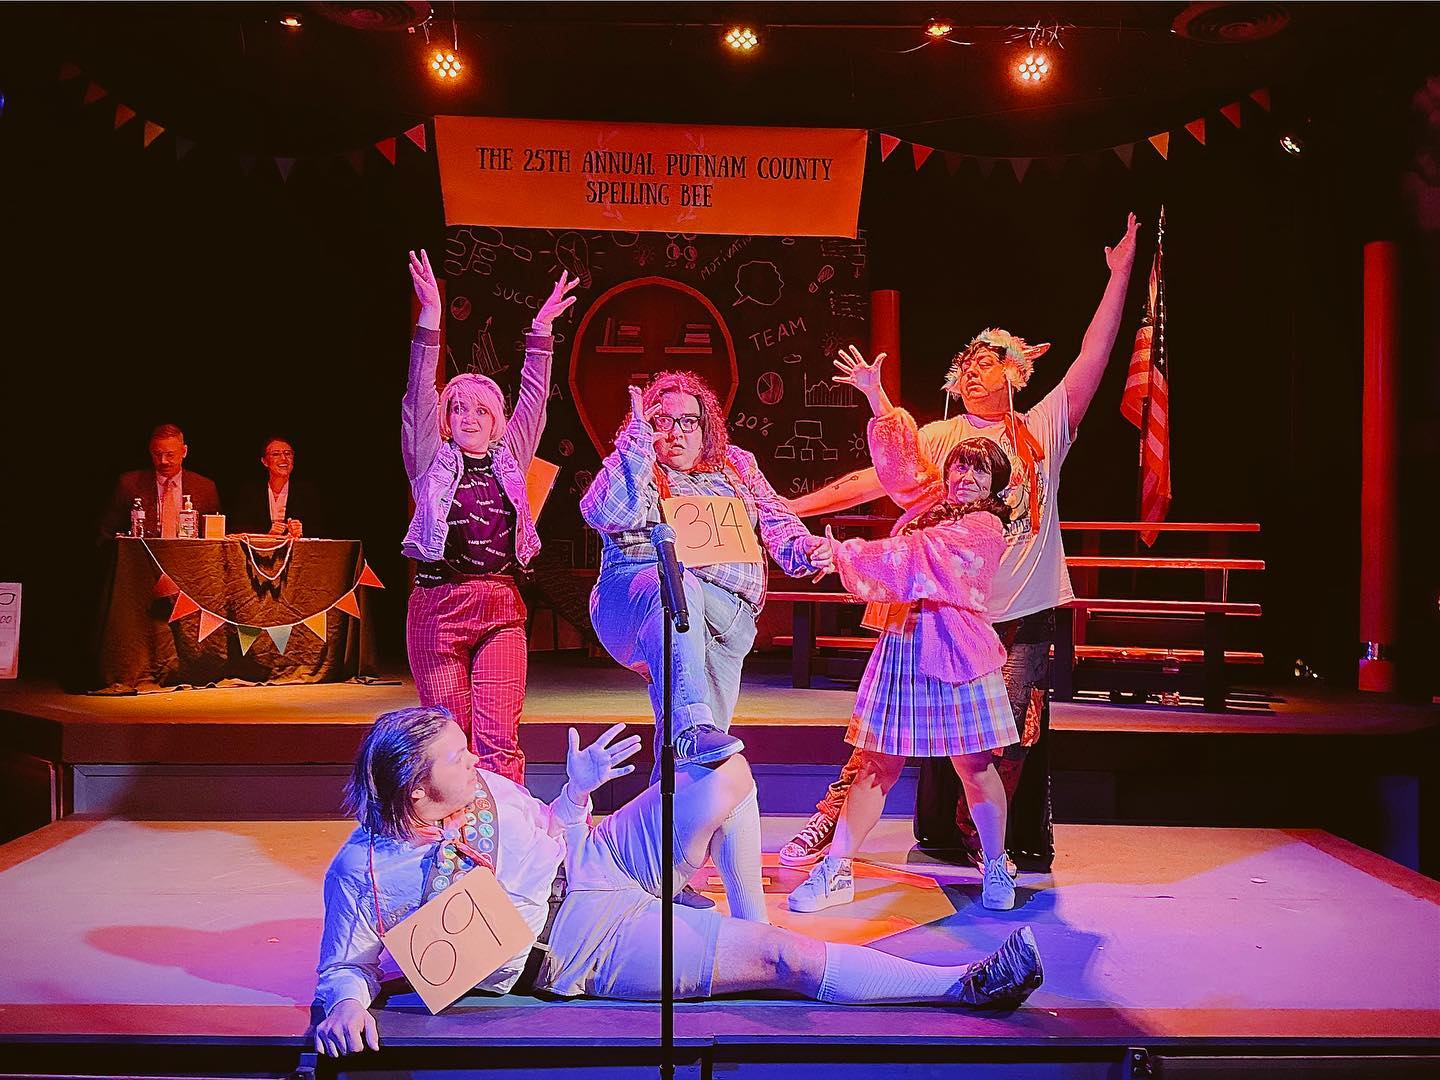 The cast of Wildsong's production of The 25th Annual Putnam County Spelling Bee (photo by Brooke Aliceon)